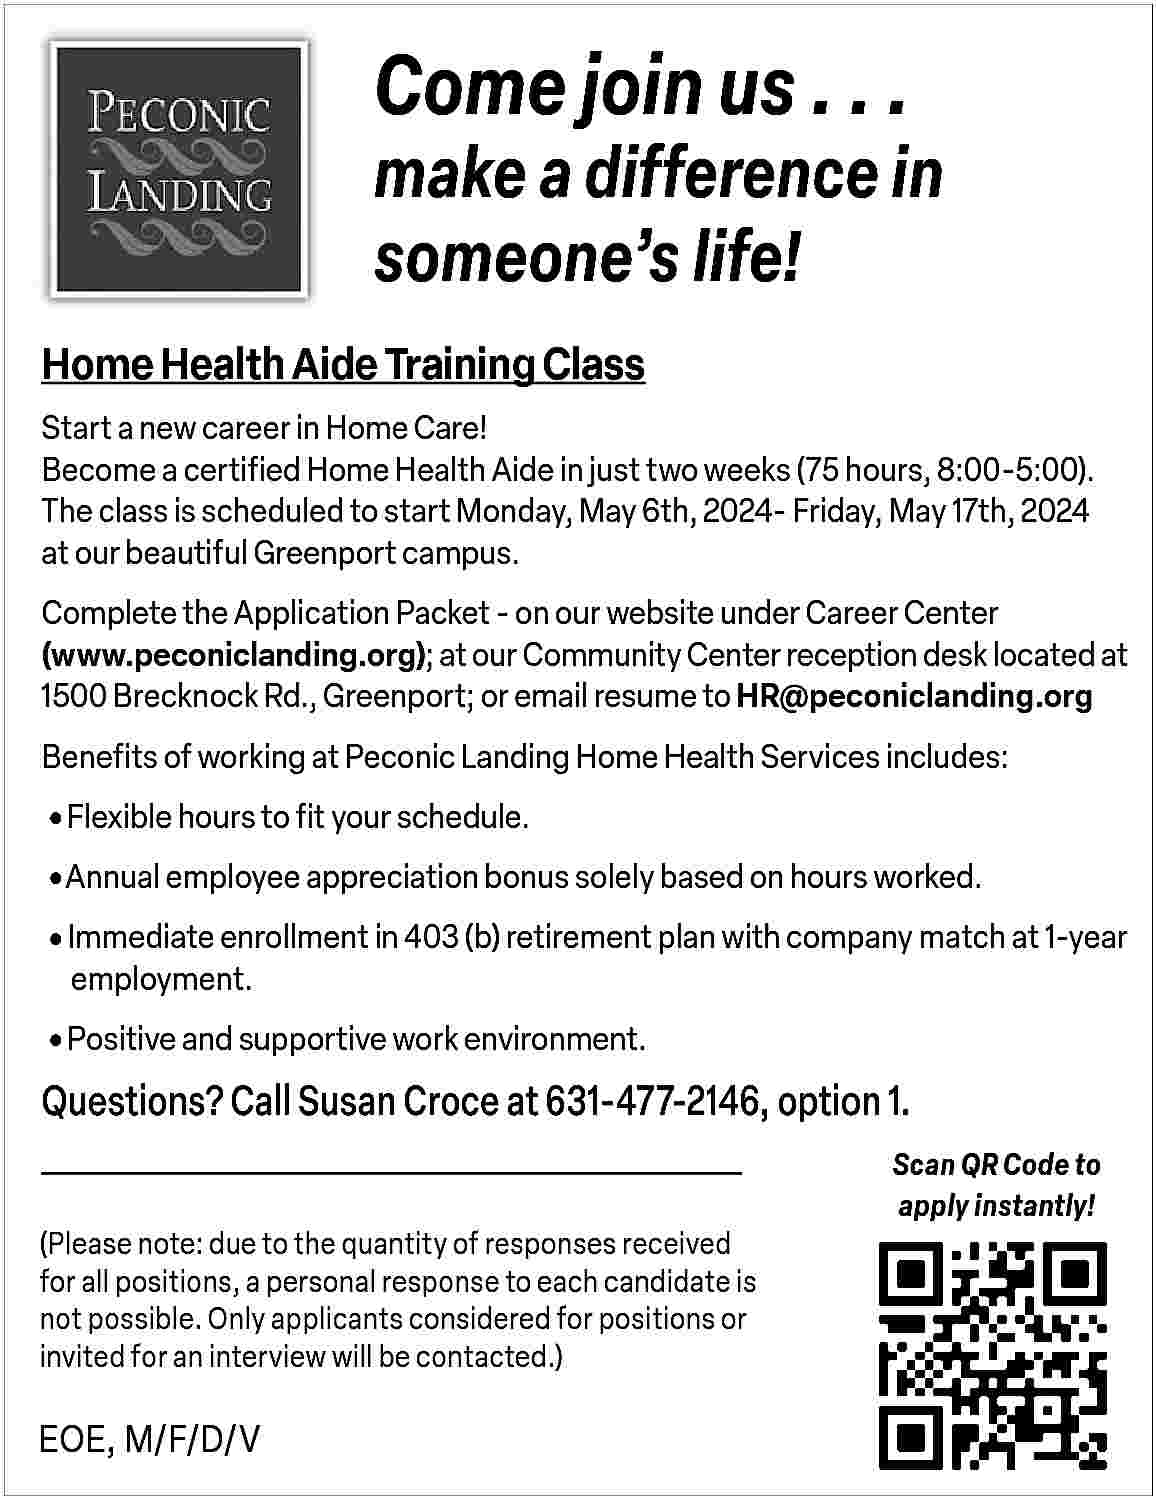 Come join us . .  Come join us . . .    make a difference in  someone   s life!  Home Health Aide Training Class  Start a new career in Home Care!  Become a certified Home Health Aide in just two weeks (75 hours, 8:00-5:00).  The class is scheduled to start Monday, May 6th, 2024- Friday, May 17th, 2024  at our beautiful Greenport campus.  Complete the Application Packet - on our website under Career Center  (www.peconiclanding.org); at our Community Center reception desk located at  1500 Brecknock Rd., Greenport; or email resume to HR@peconiclanding.org  Benefits of working at Peconic Landing Home Health Services includes:       Flexible hours to fit your schedule.     Annual employee appreciation bonus solely based on hours worked.     Immediate enrollment in 403 (b) retirement plan with company match at 1-year 	  	employment.       Positive and supportive work environment.    Questions? Call Susan Croce at 631-477-2146, option 1.  (Please note: due to the quantity of responses received  for all positions, a personal response to each candidate is  not possible. Only applicants considered for positions or  invited for an interview will be contacted.)    EOE, M/F/D/V    Scan QR Code to  apply instantly!     